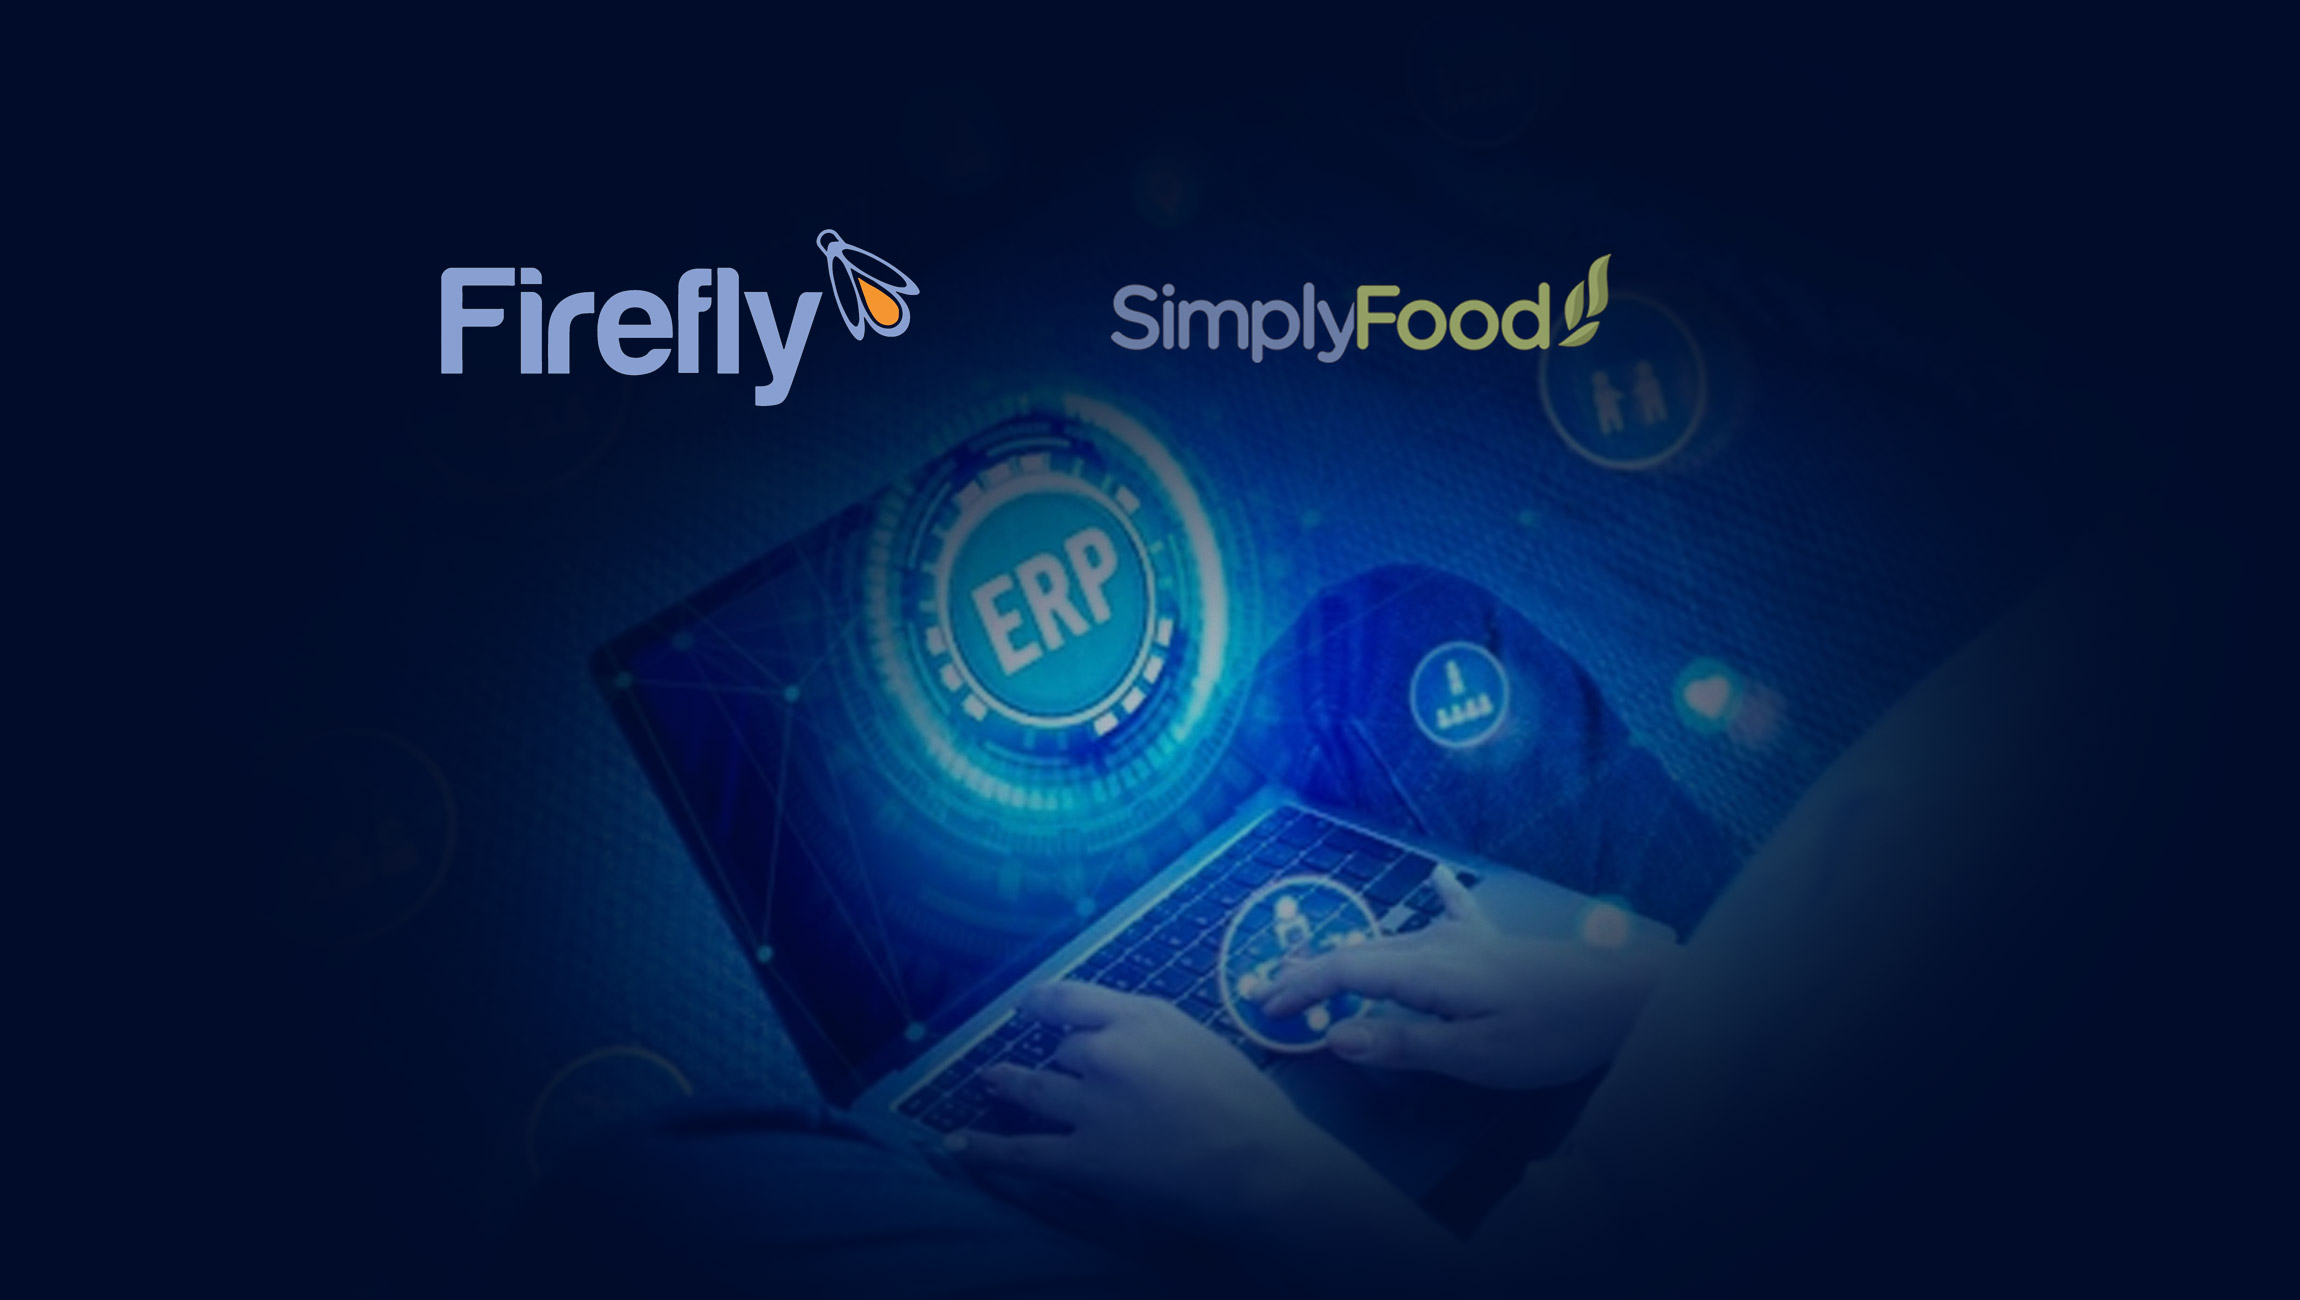 Firefly-Business-Group-Officially-Launches-'SimplyFood'-ERP-Software_-Powered-by-Acumatica